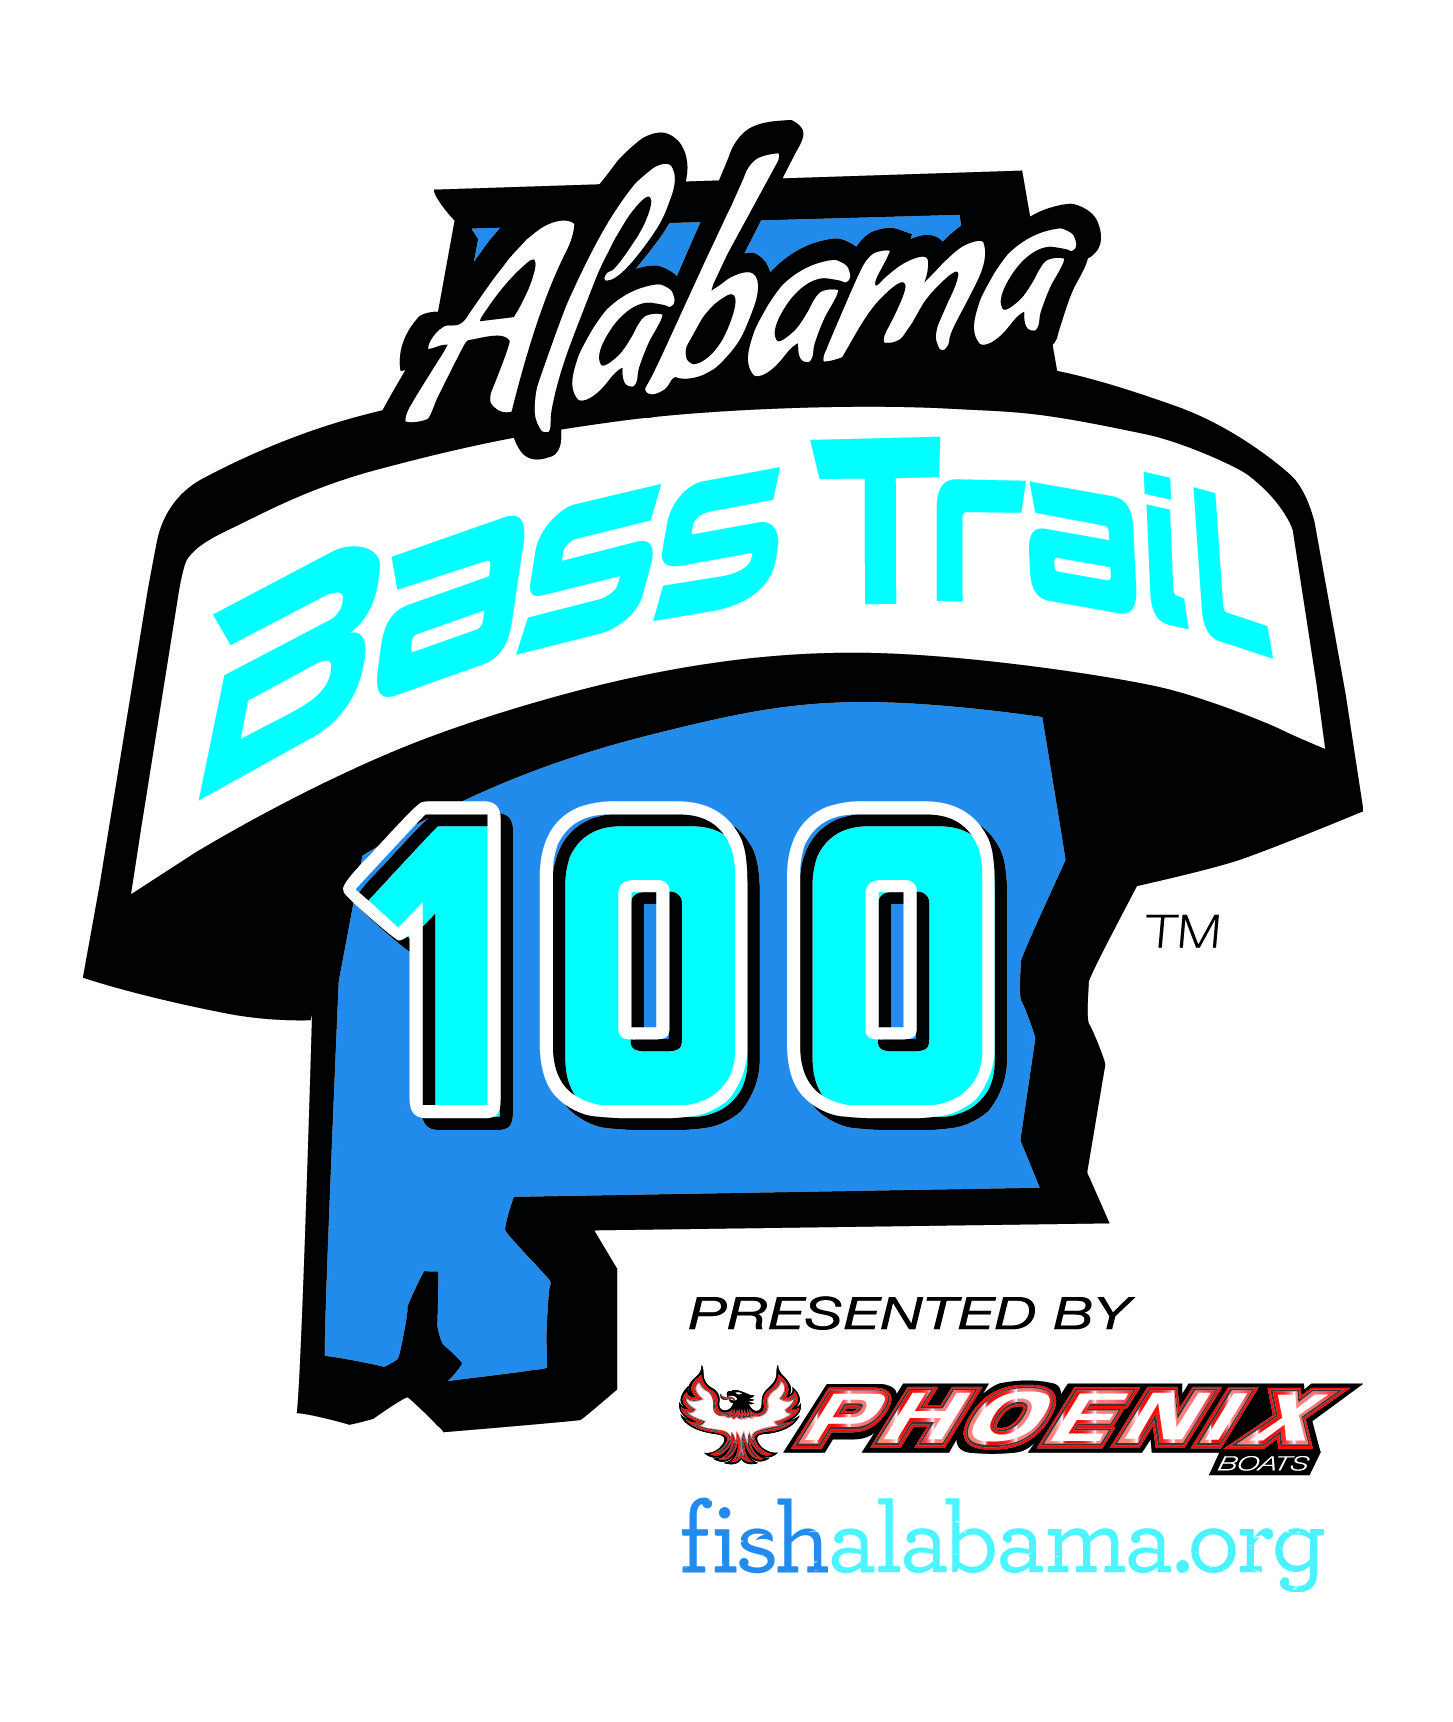 Alabama Bass Trail Expands in 2021